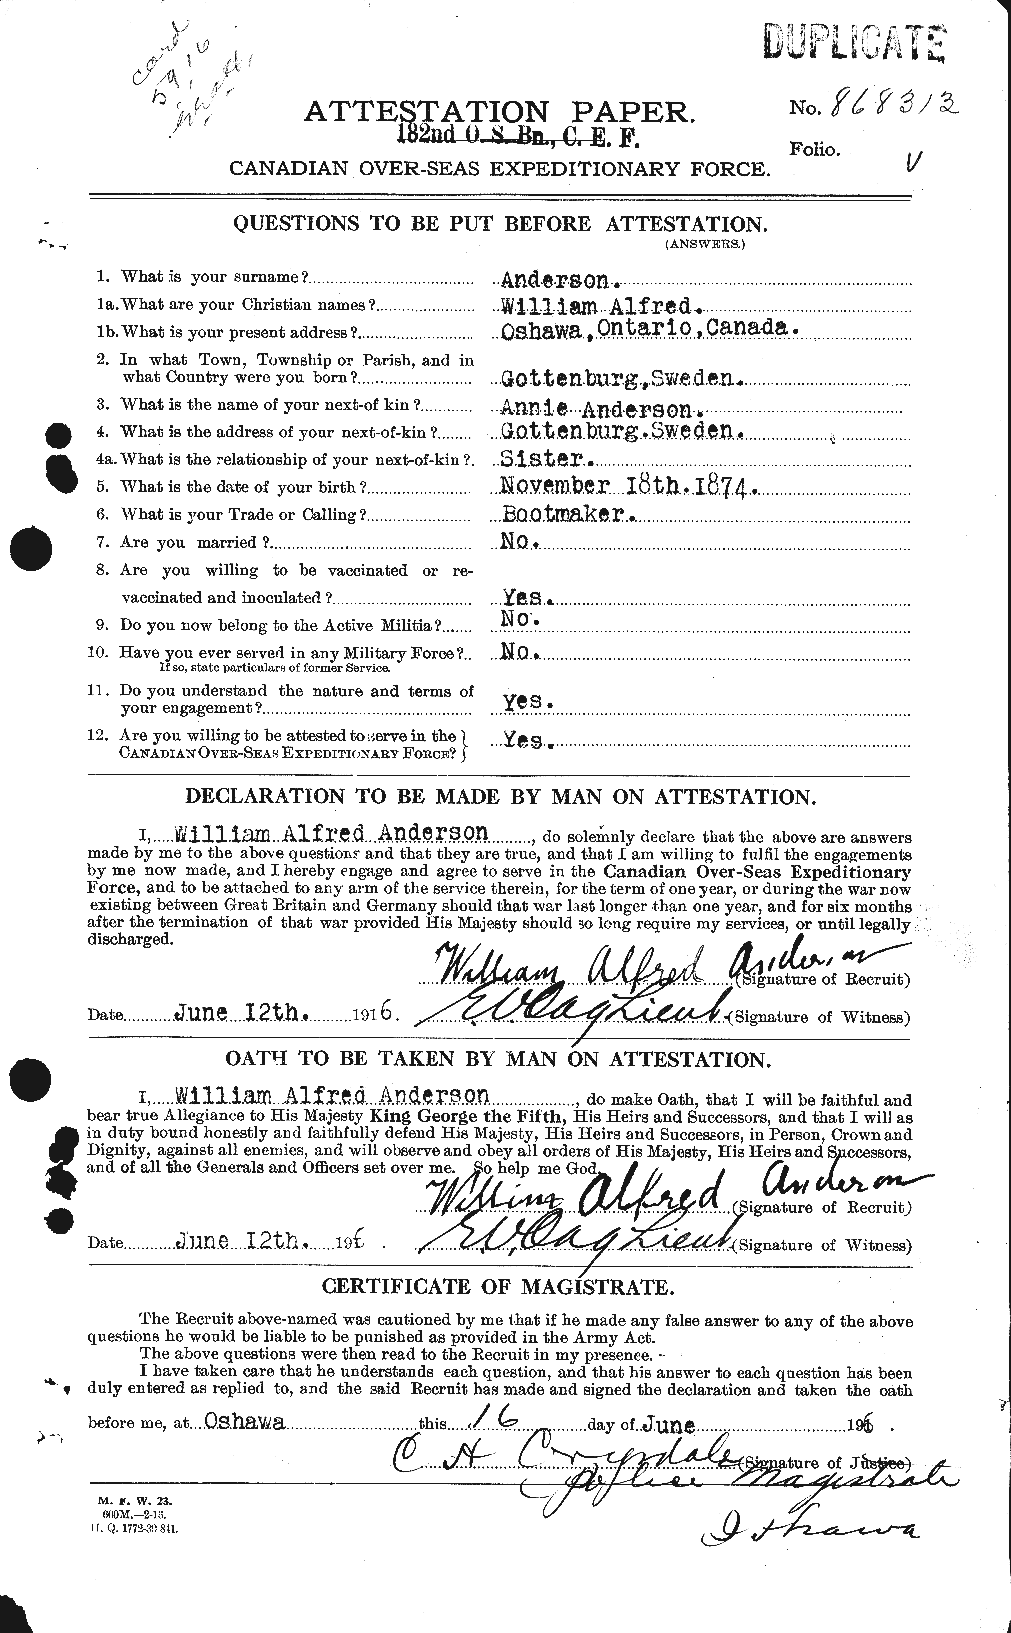 Personnel Records of the First World War - CEF 210742a